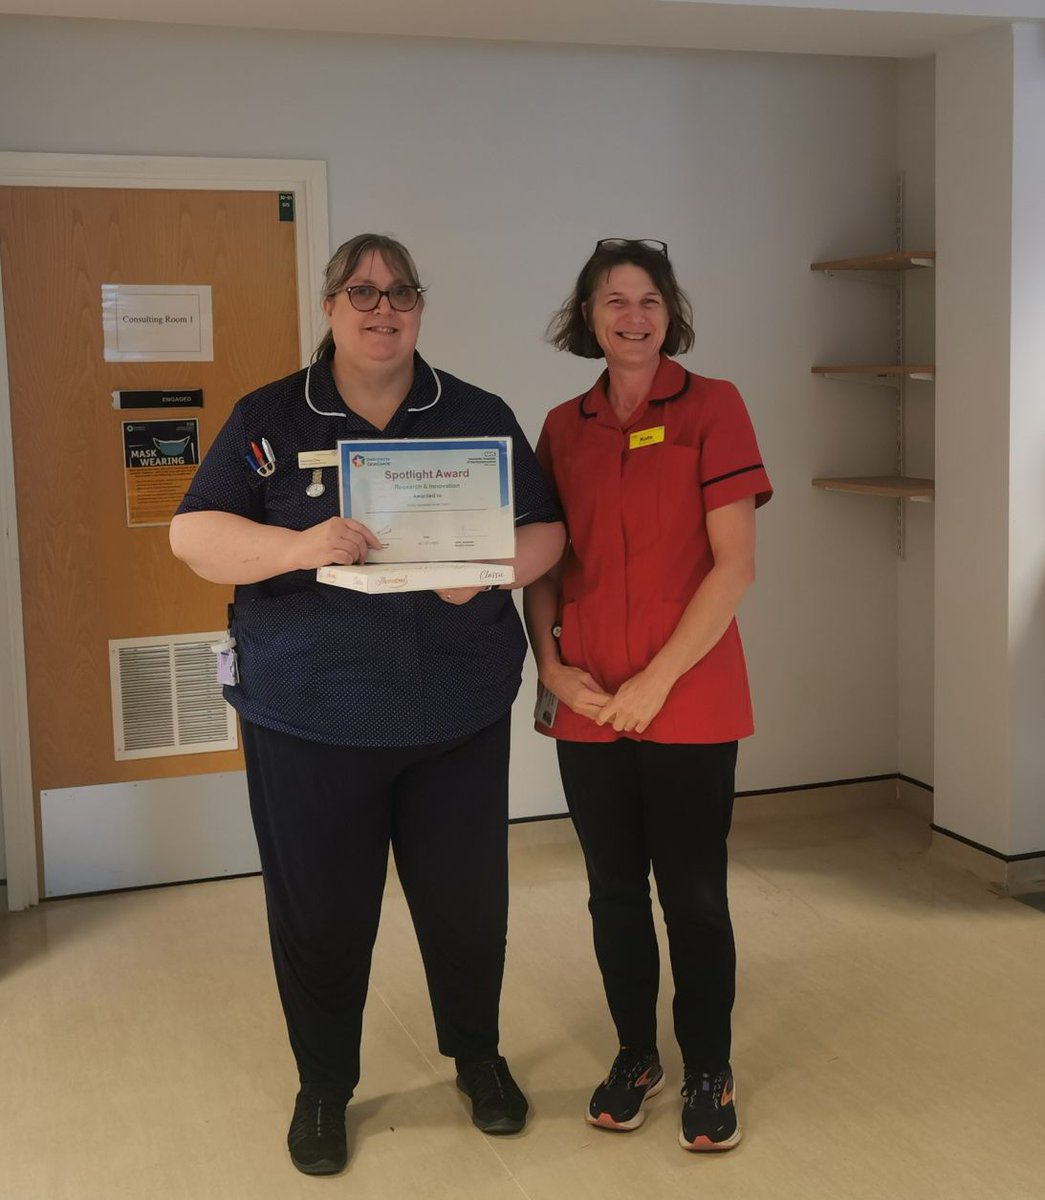 Congratulations ✨🎉to the Specialist Stroke Team on their Spotlight Award for their invaluable help and support to research

@NGHnhstrust

#NGH #research #nghresearch #spotlightaward #teamngh #proud_NGH #NHSaward